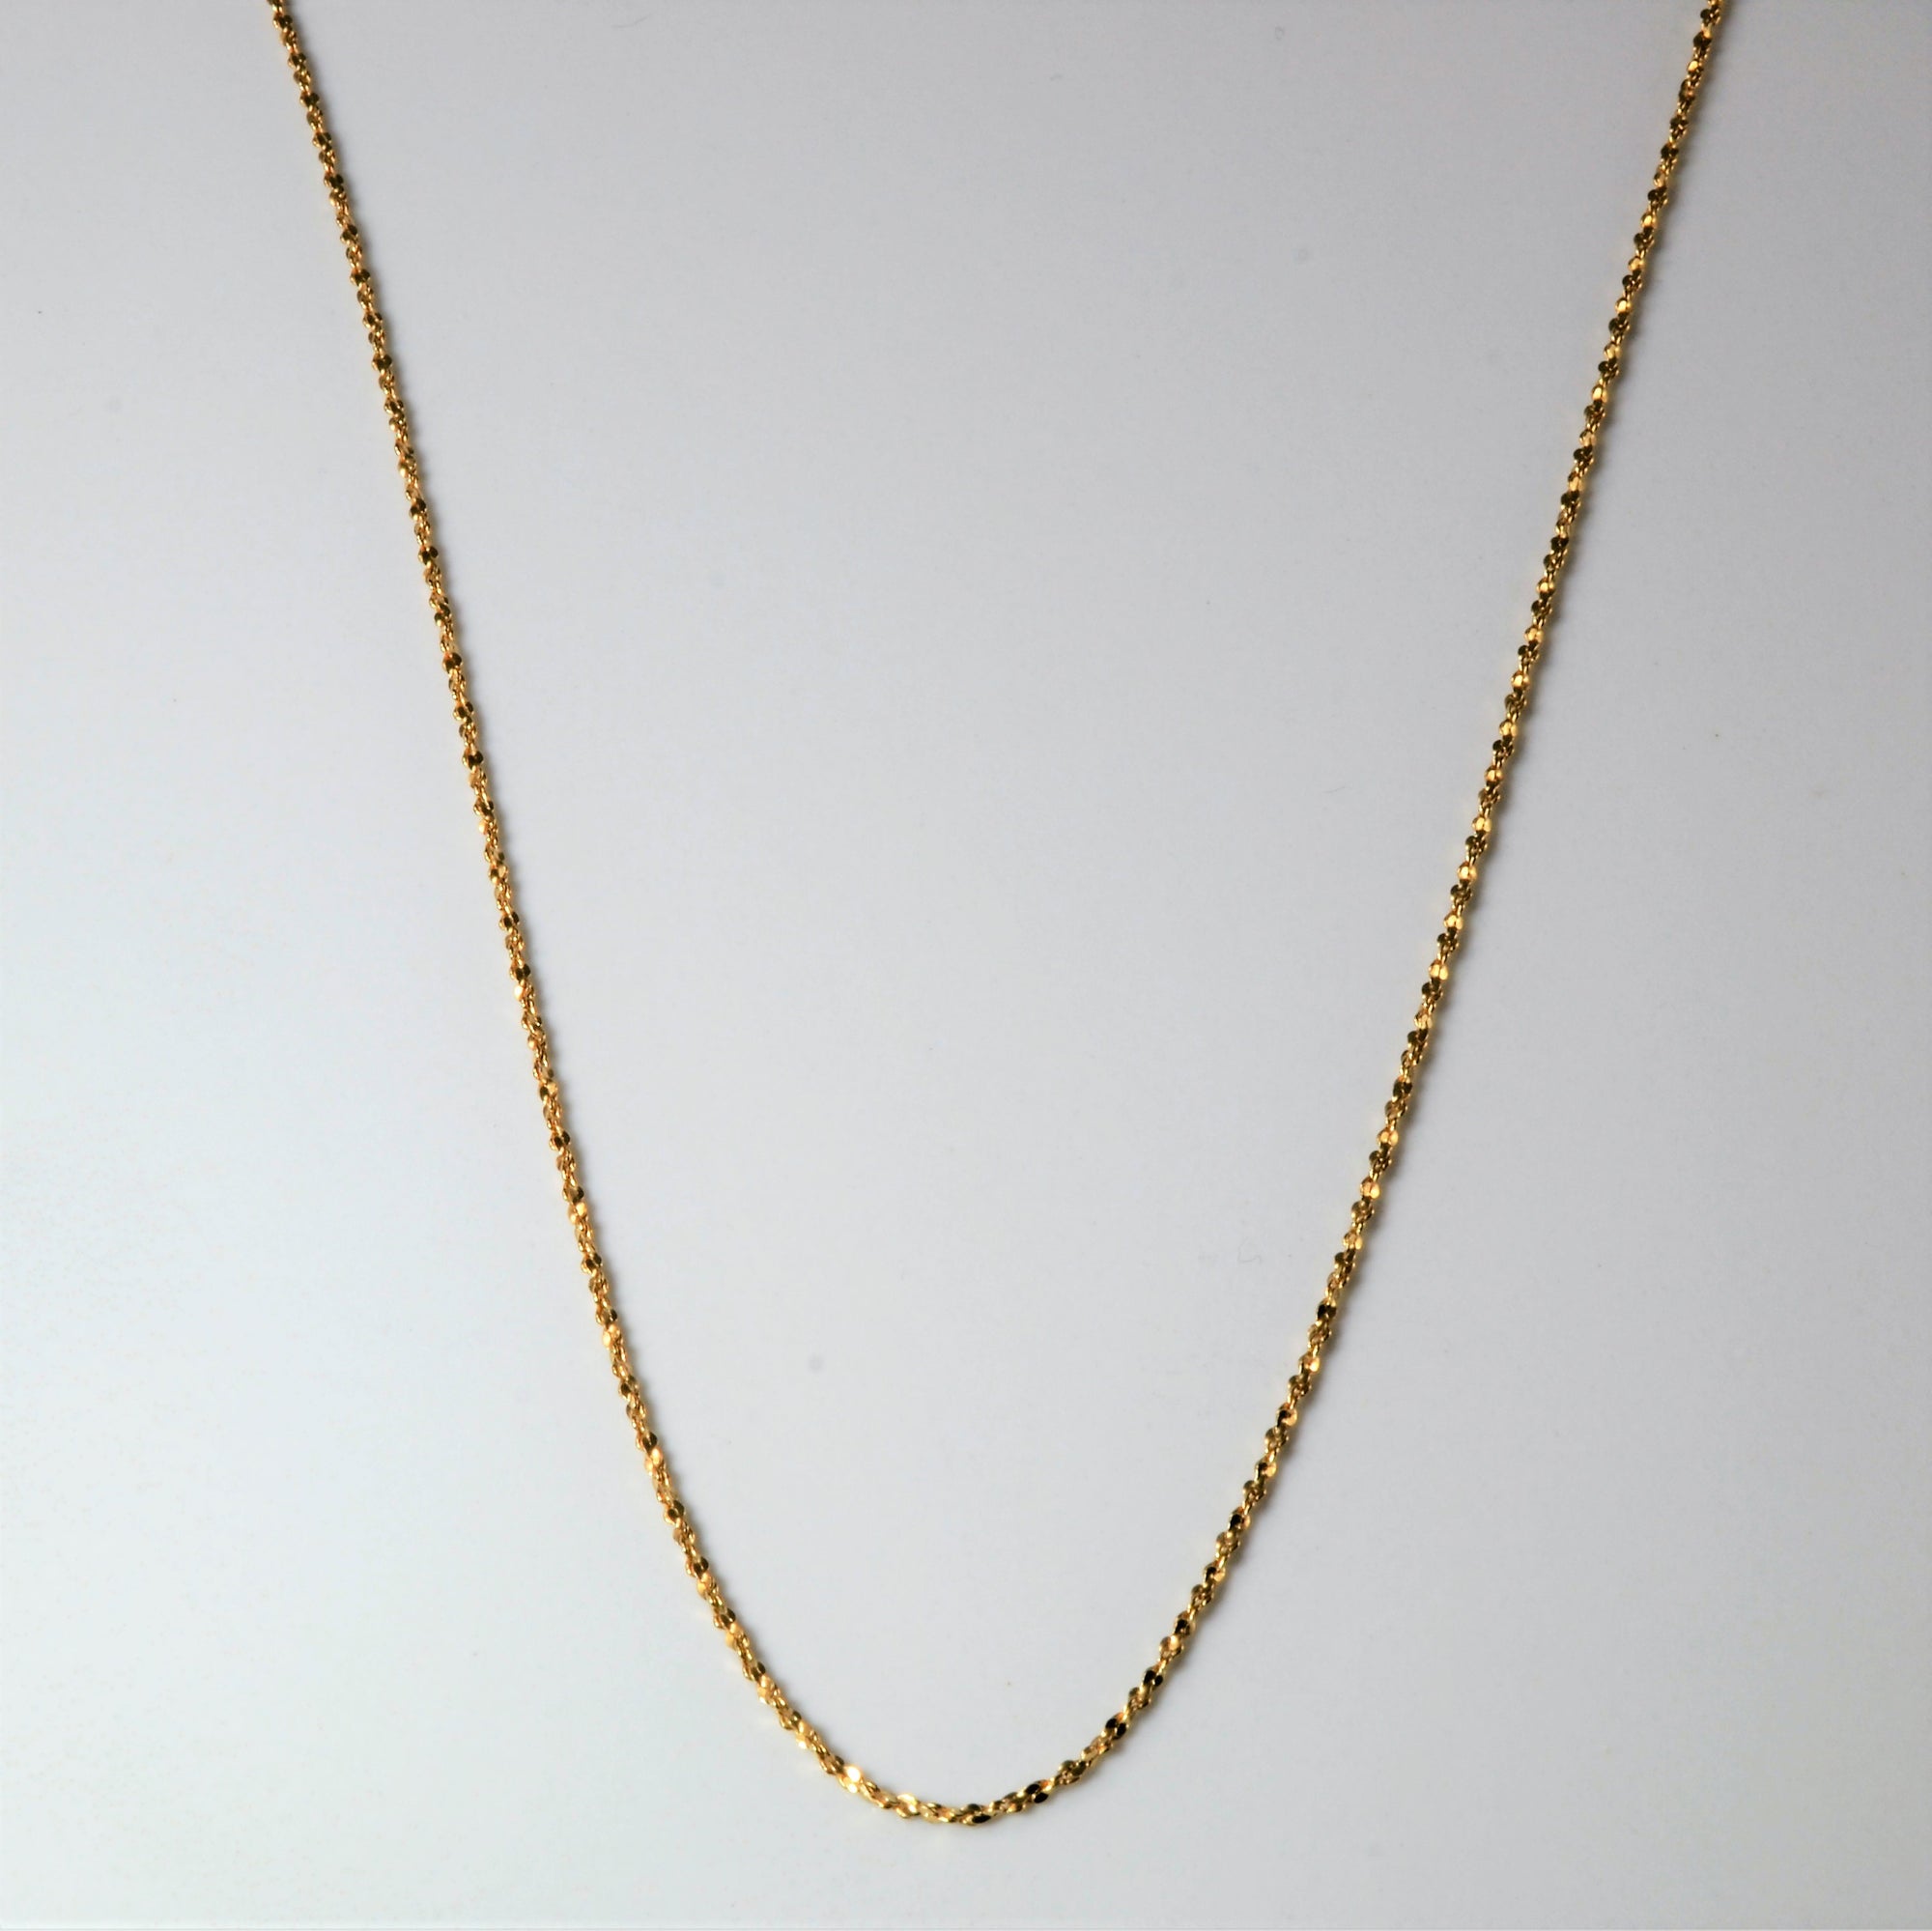 10k Yellow Gold Twisted Serpentine Chain | 24